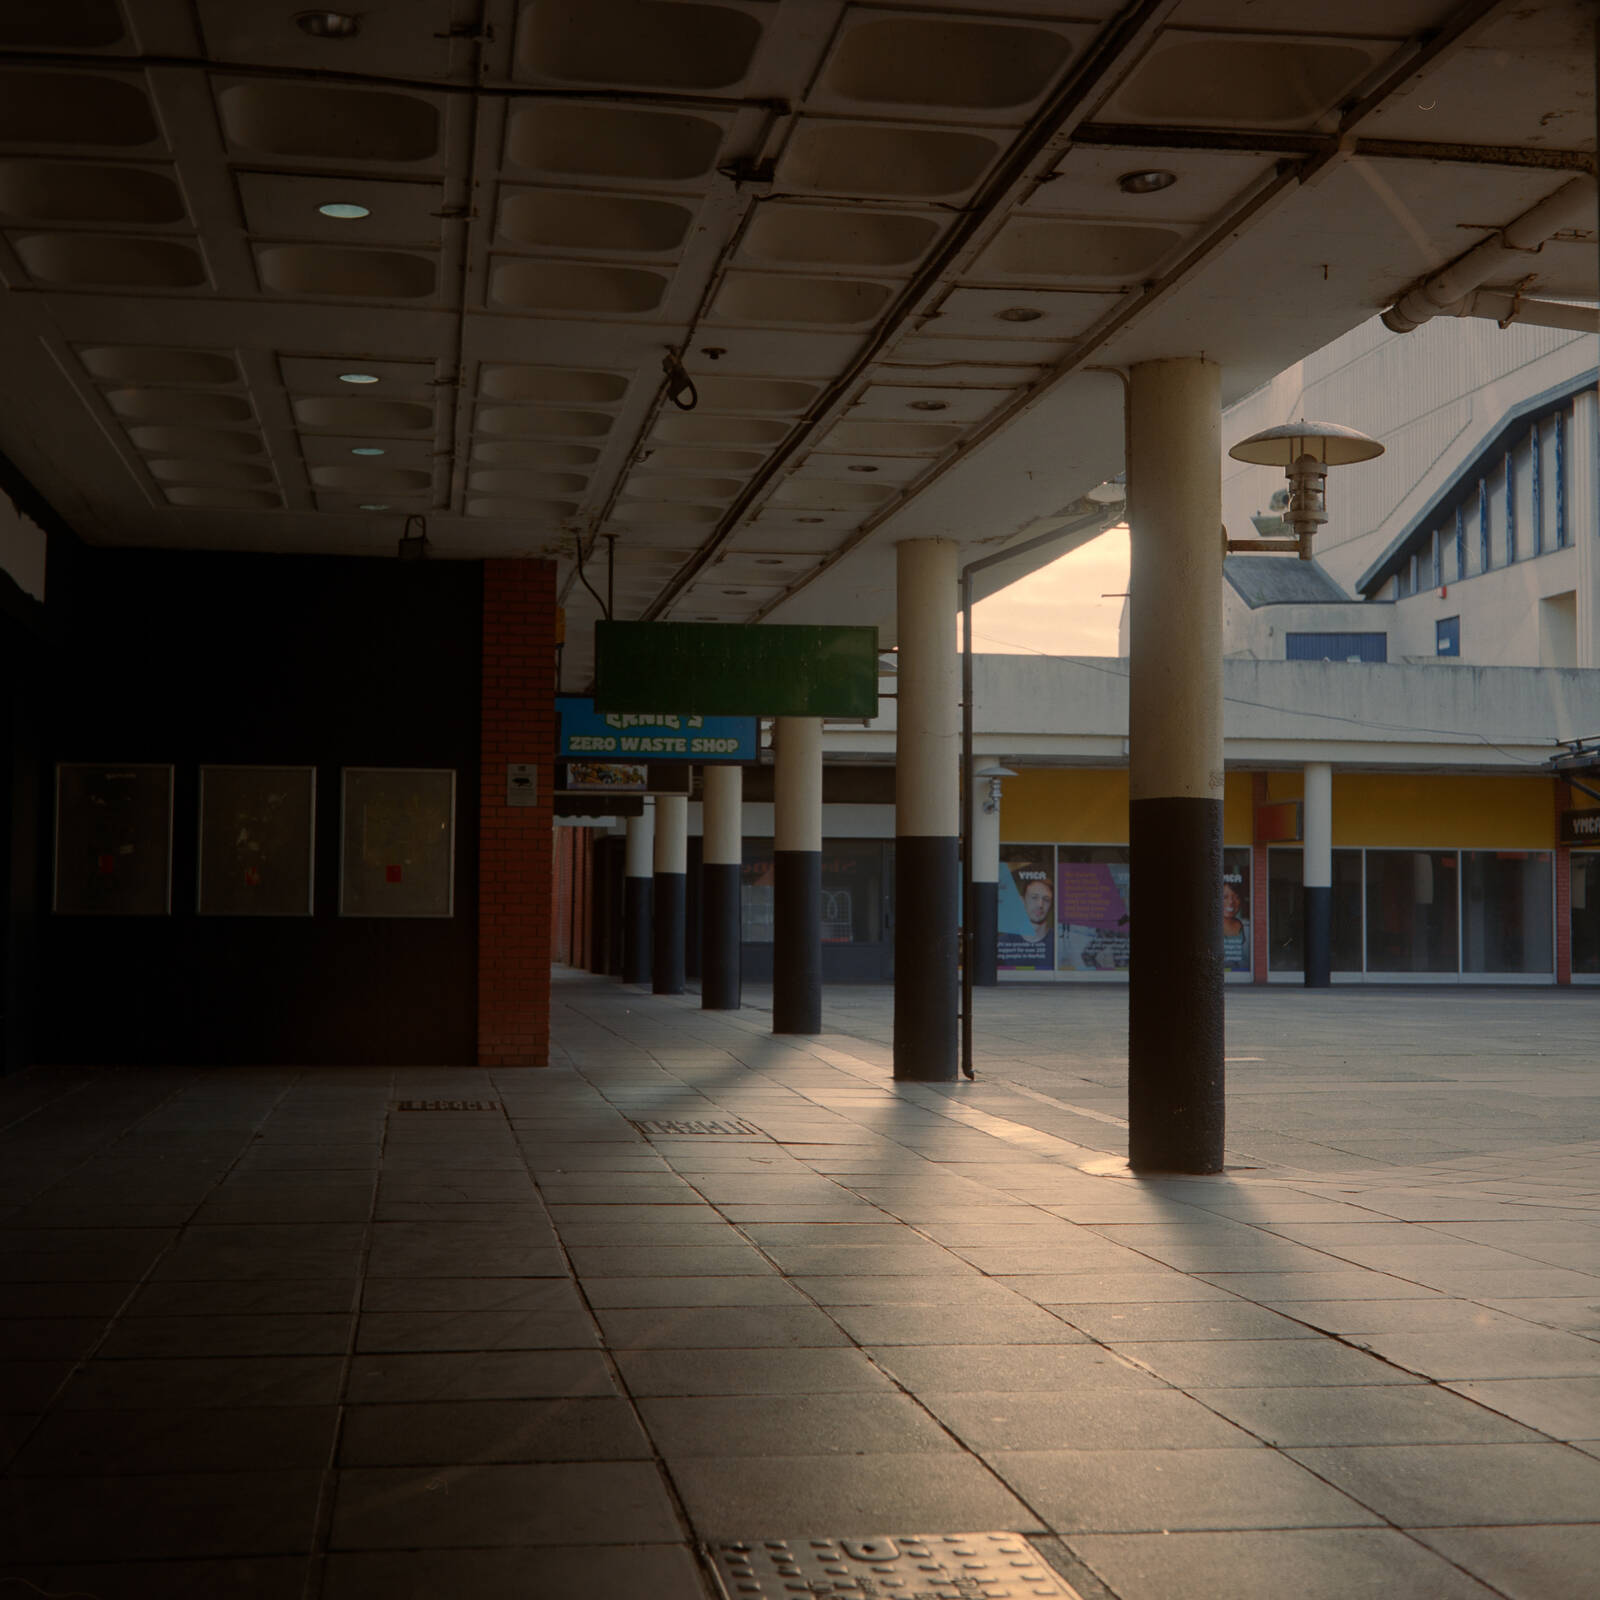 Image of Anglia Square Shopping Centre by James Billings.